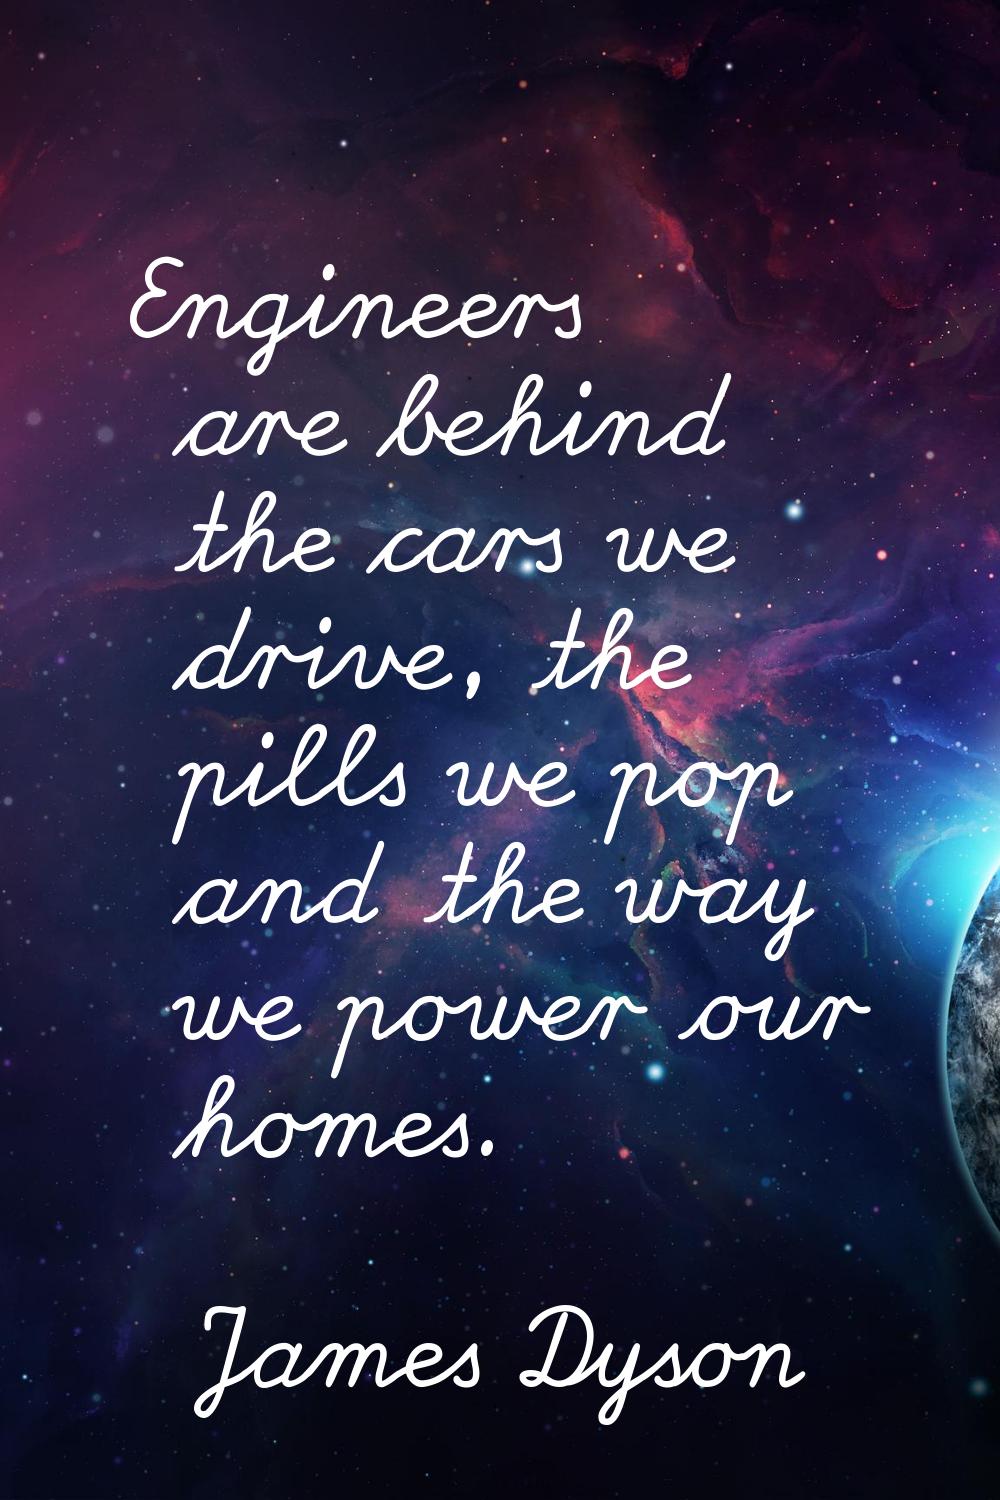 Engineers are behind the cars we drive, the pills we pop and the way we power our homes.